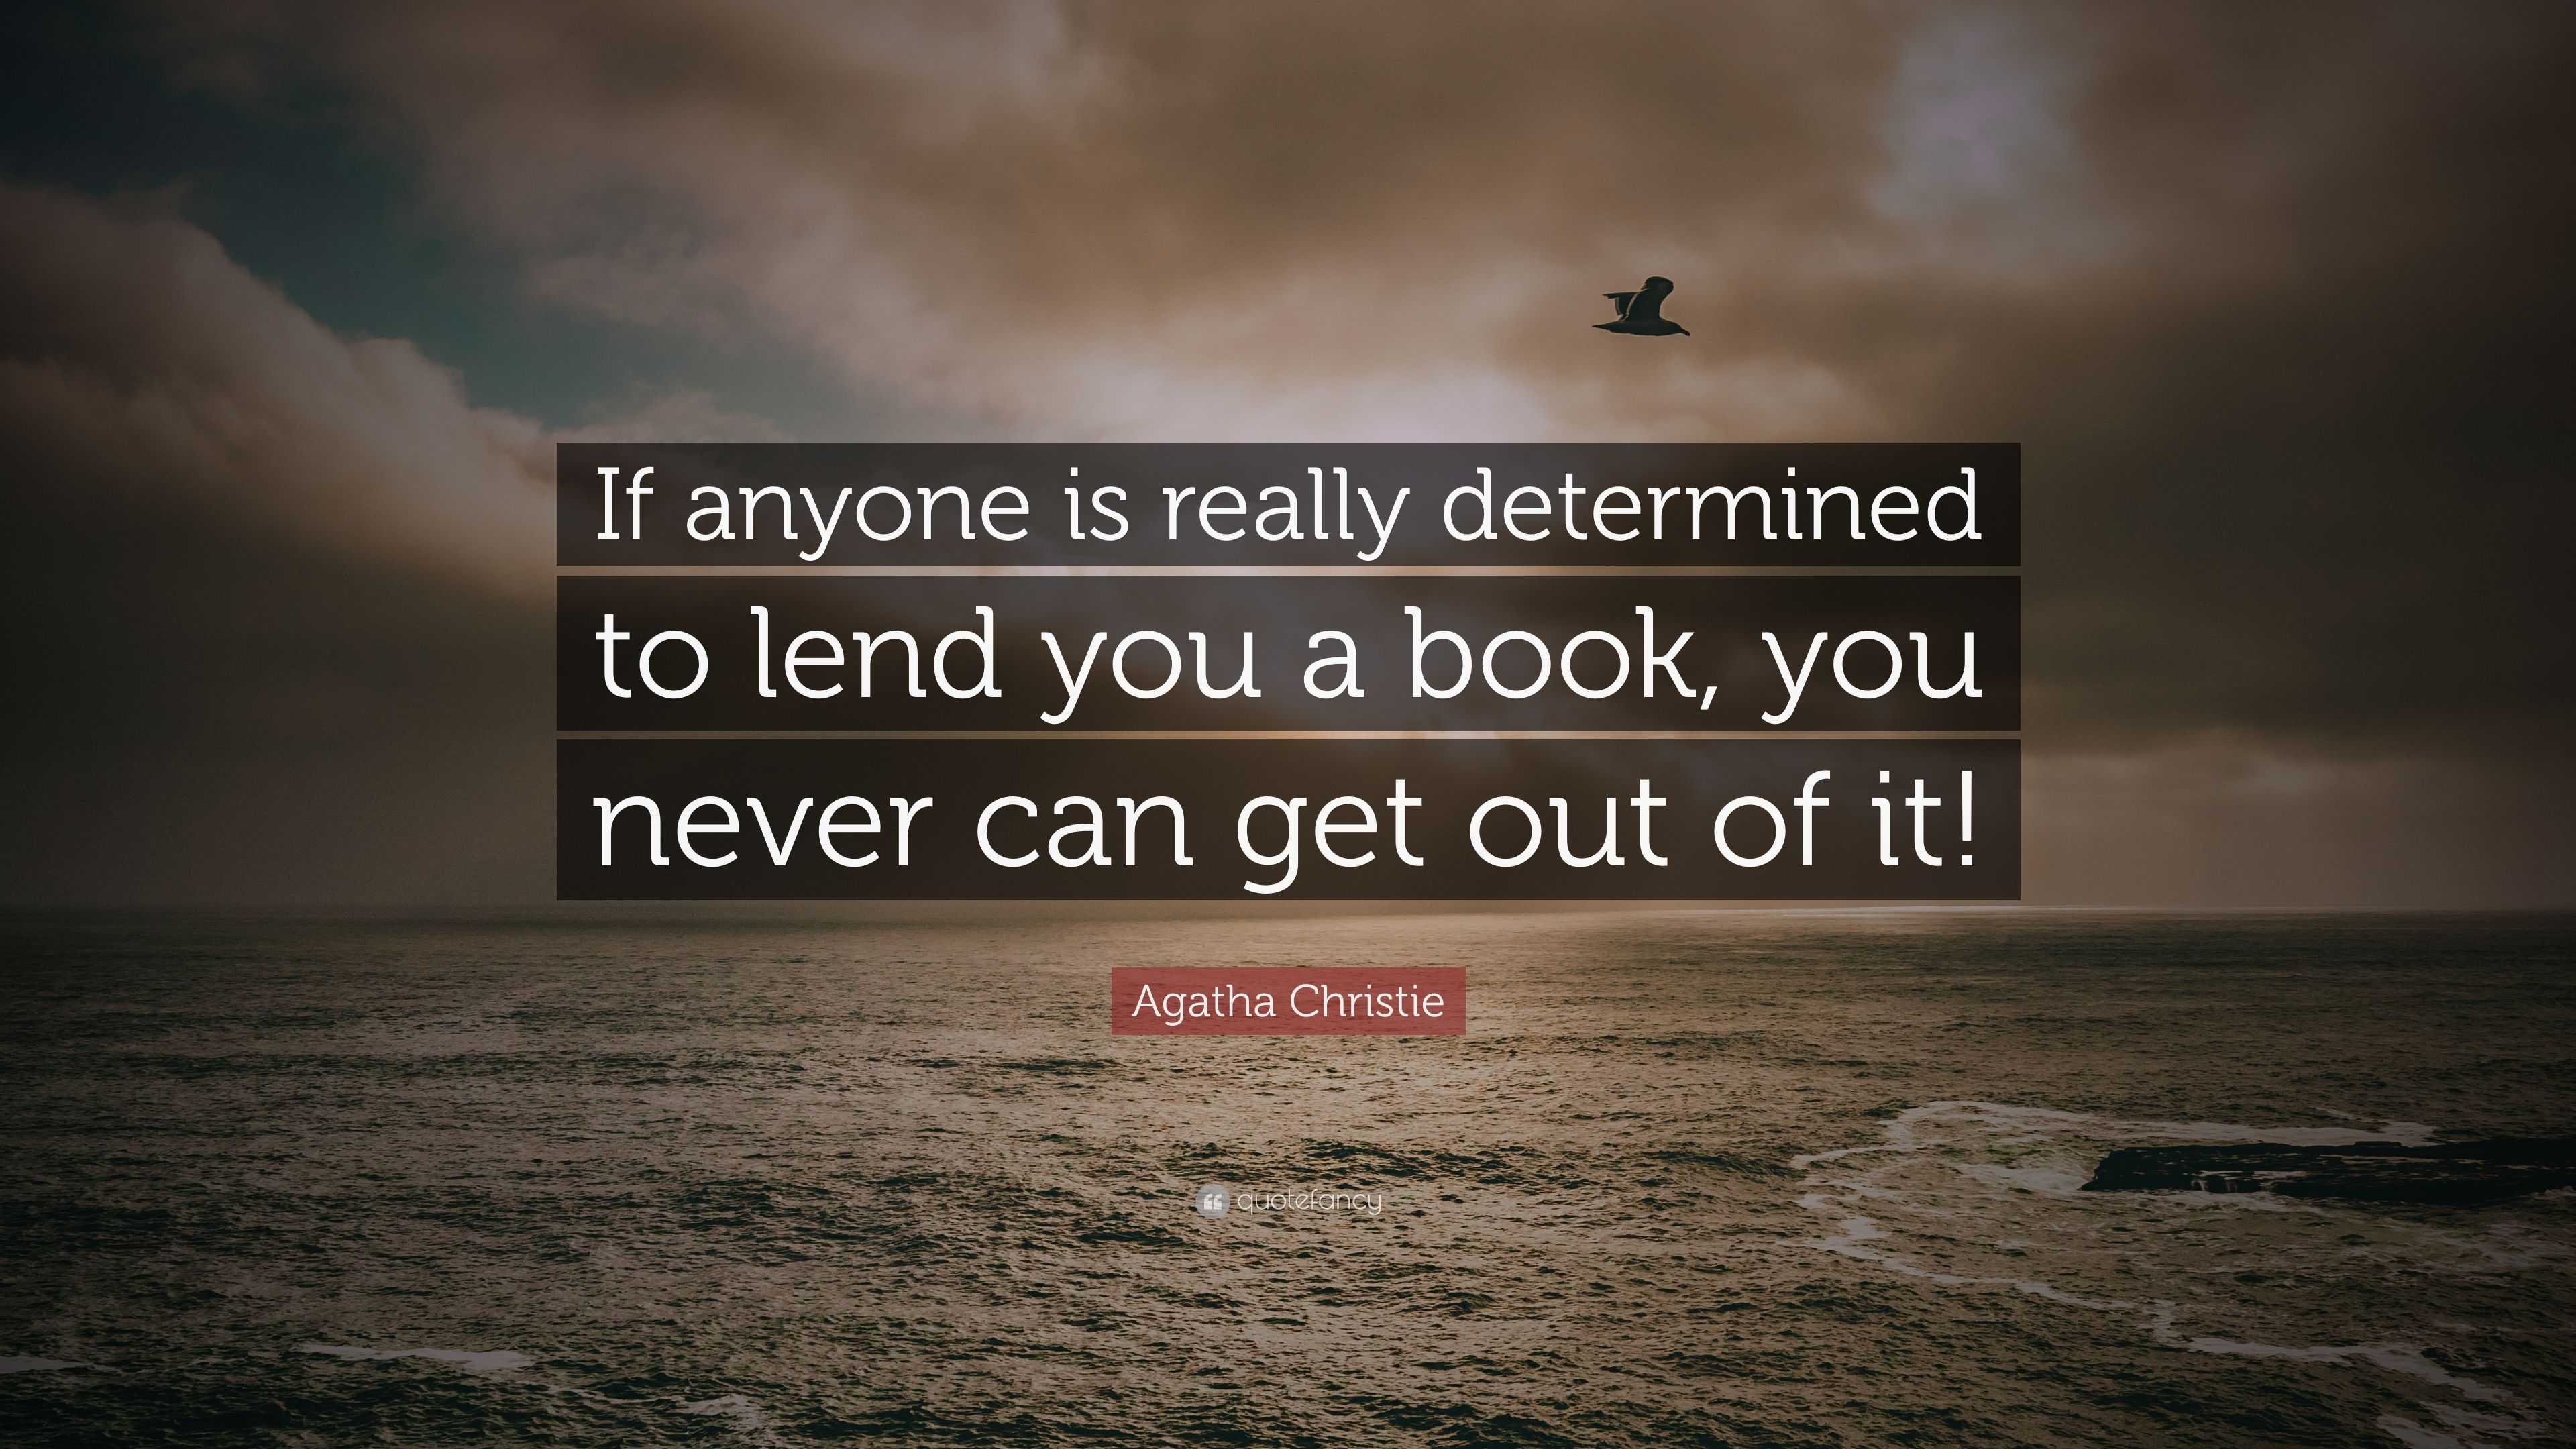 Agatha Christie Quote: “If anyone is really determined to lend you a ...